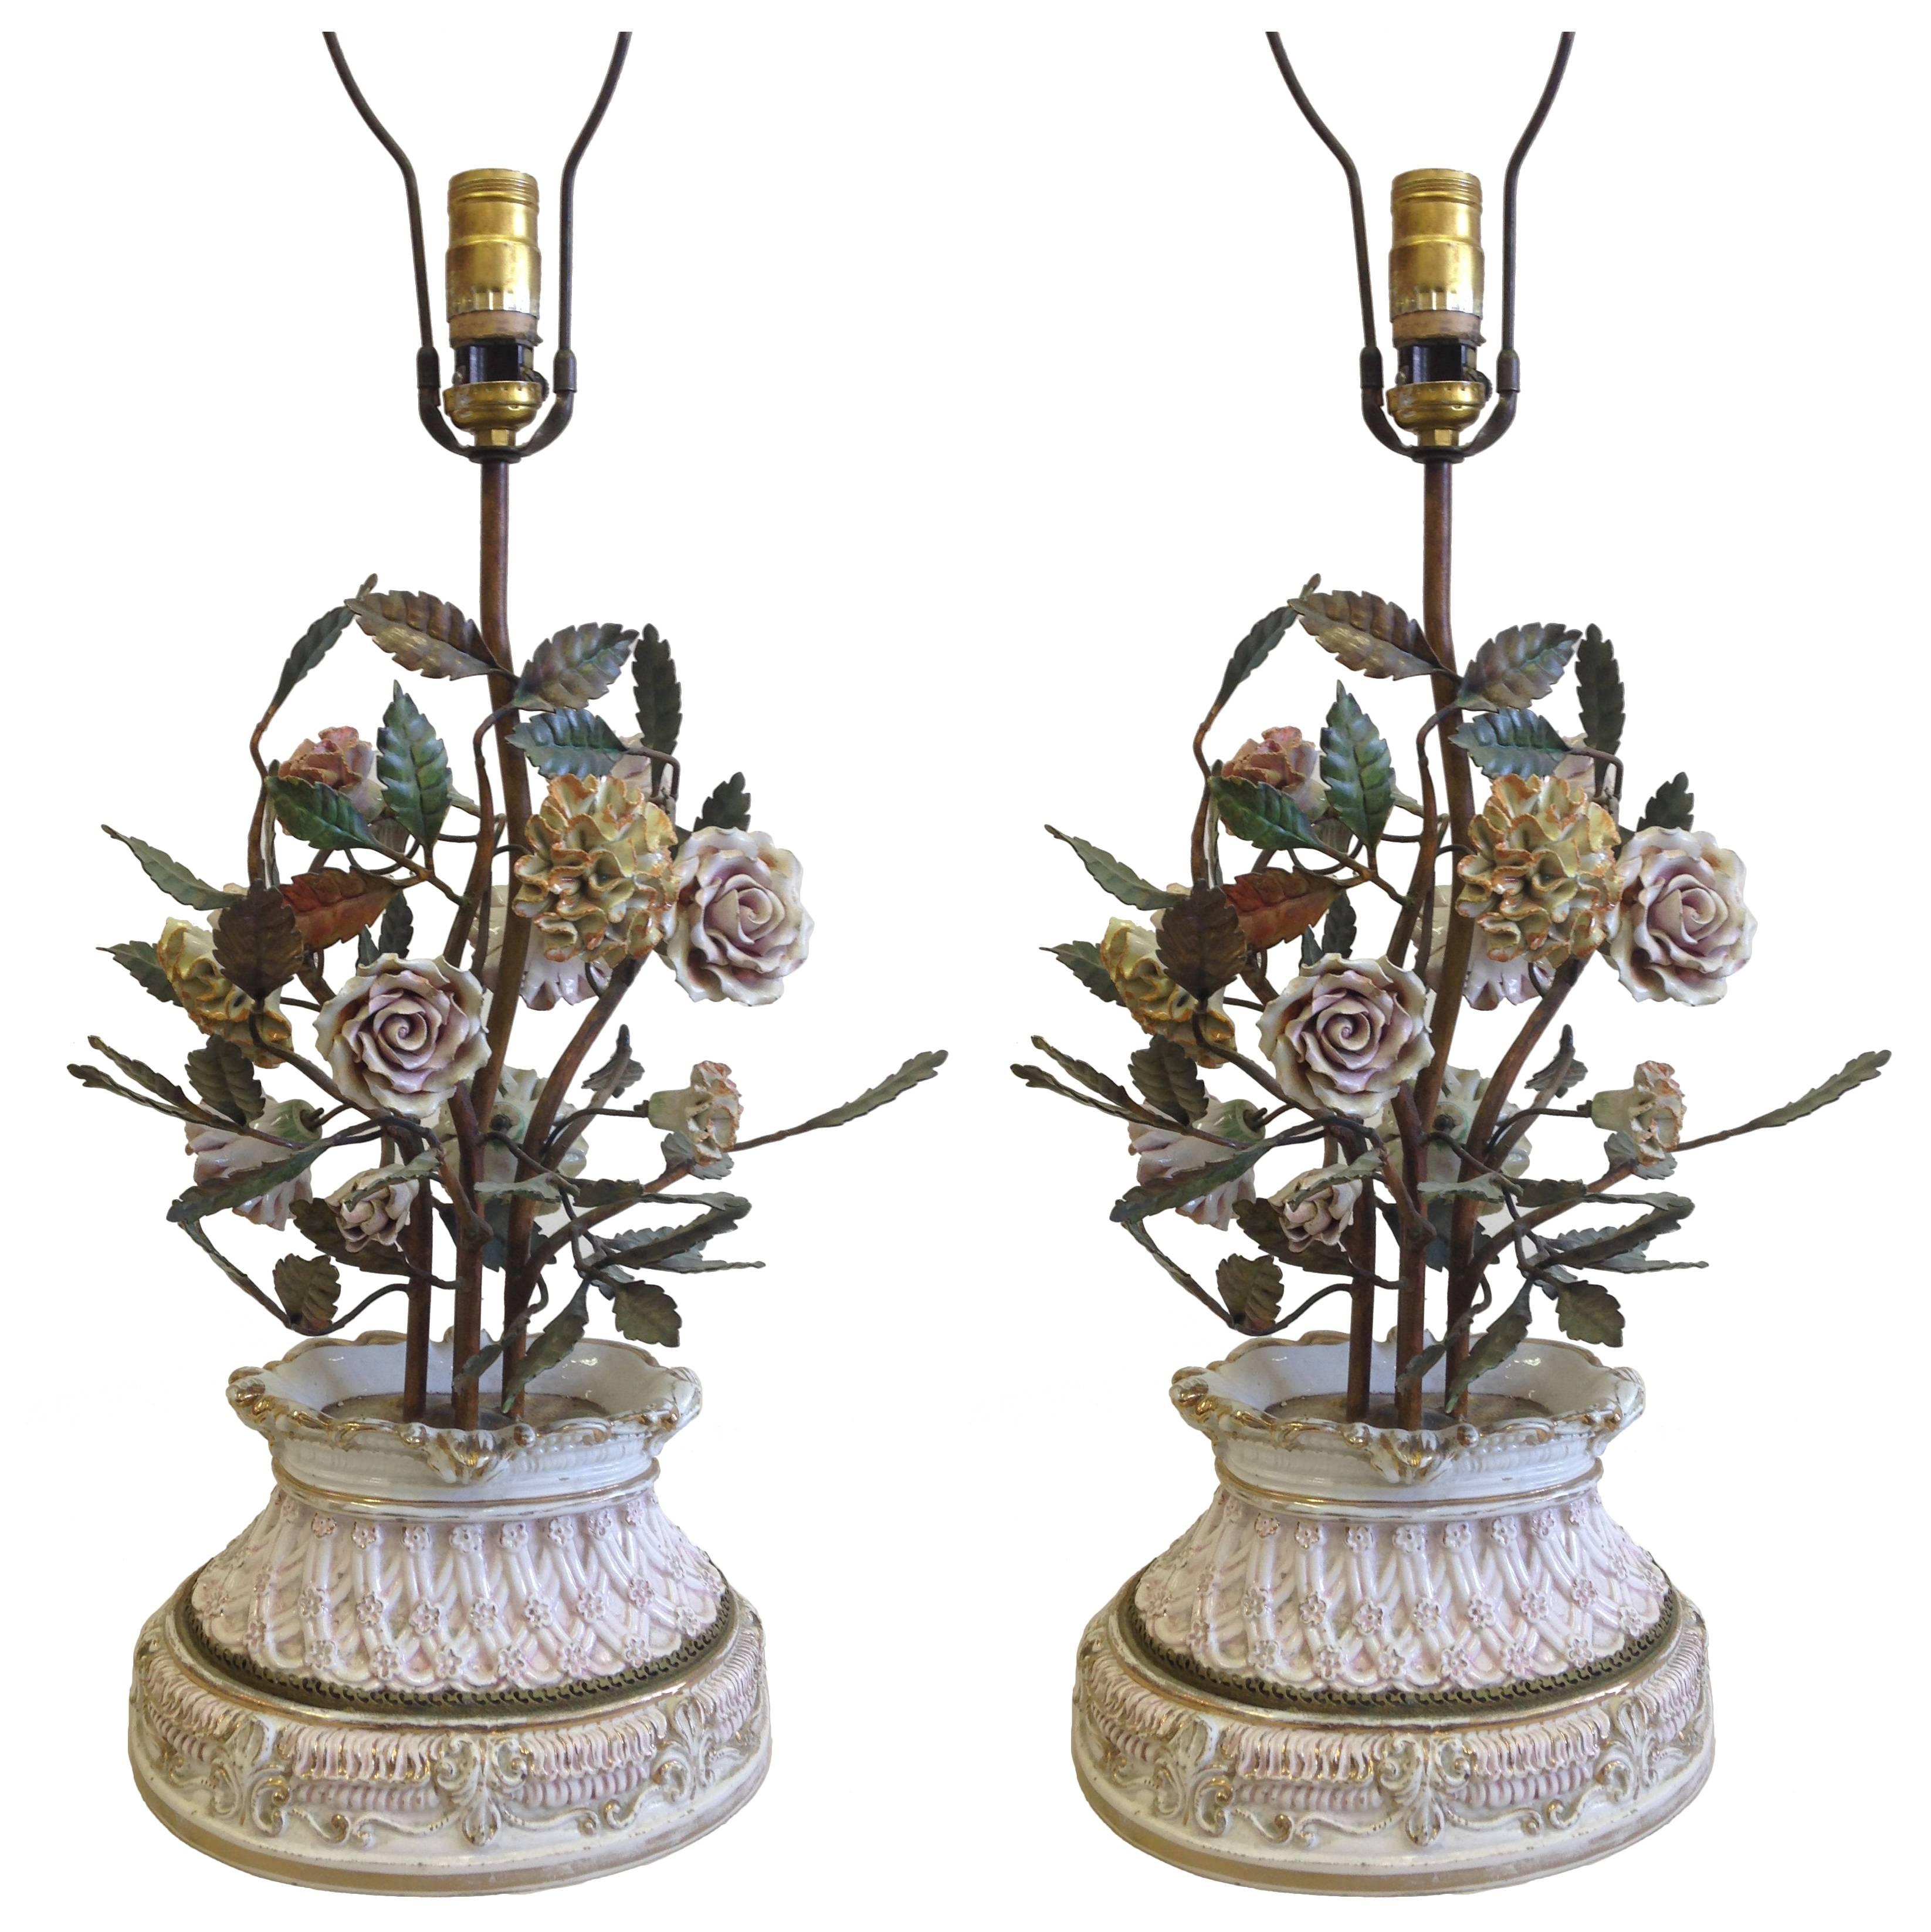 Pair of Italian Hand Made Floral Table Lamps by Capodimonte, Italy, 1950 For Sale